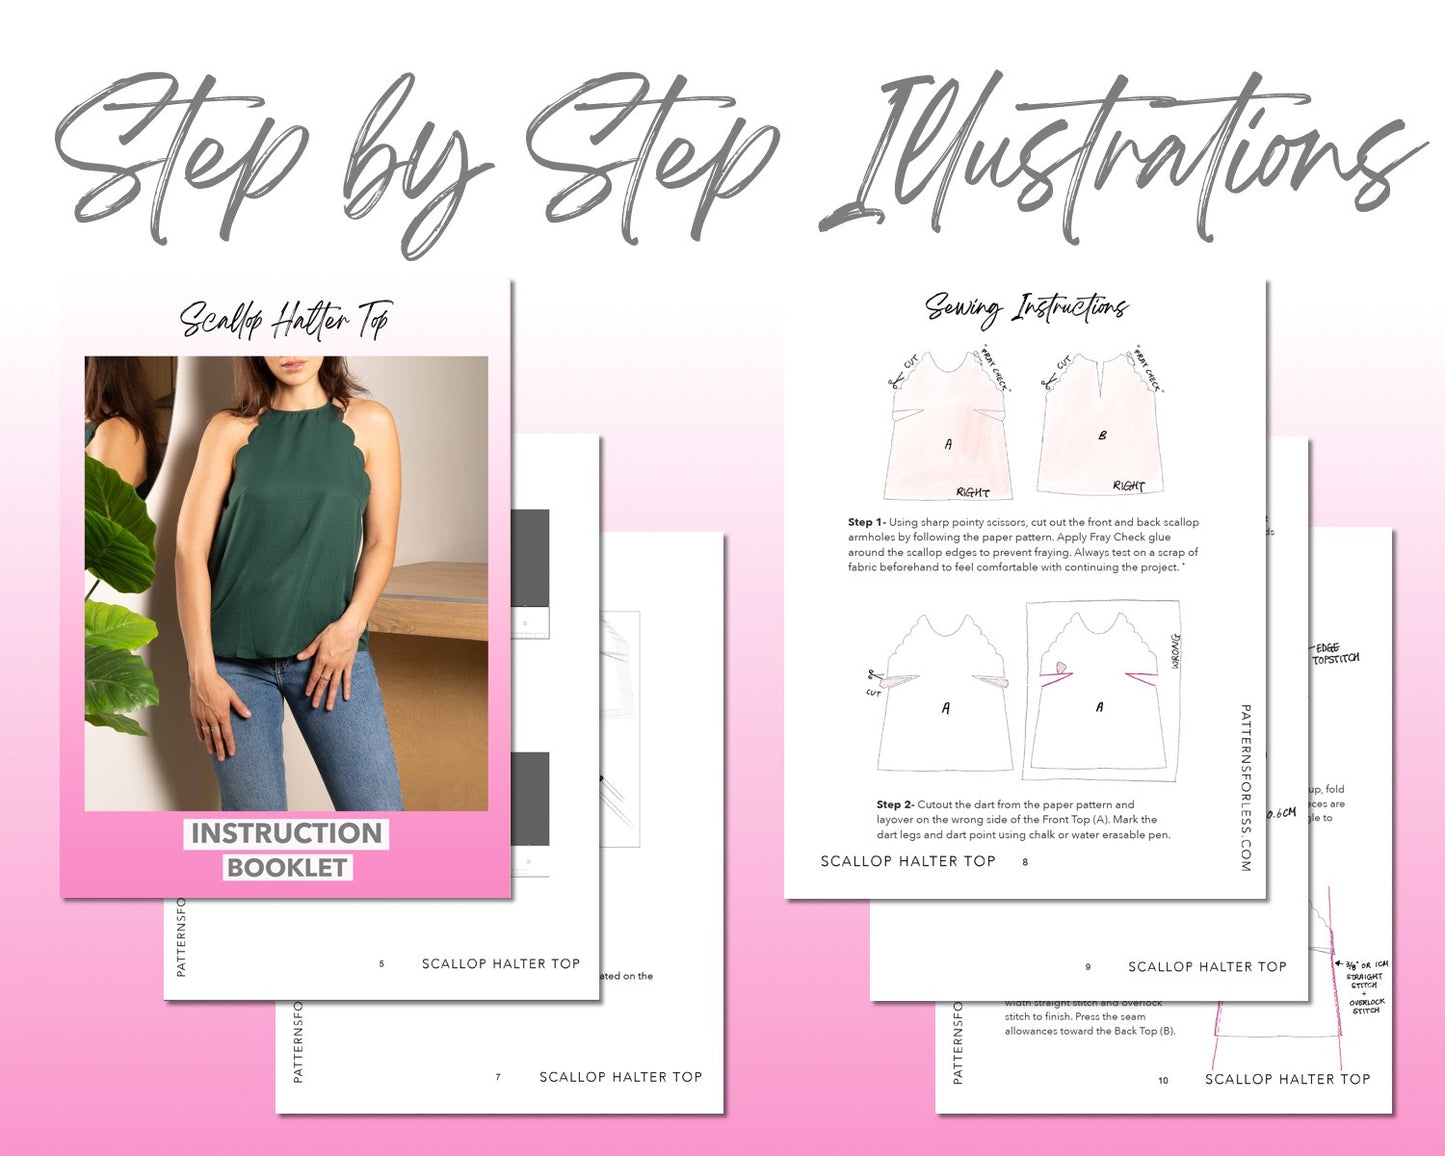 Scallop Halter Top sewing pattern step by step illustrations.